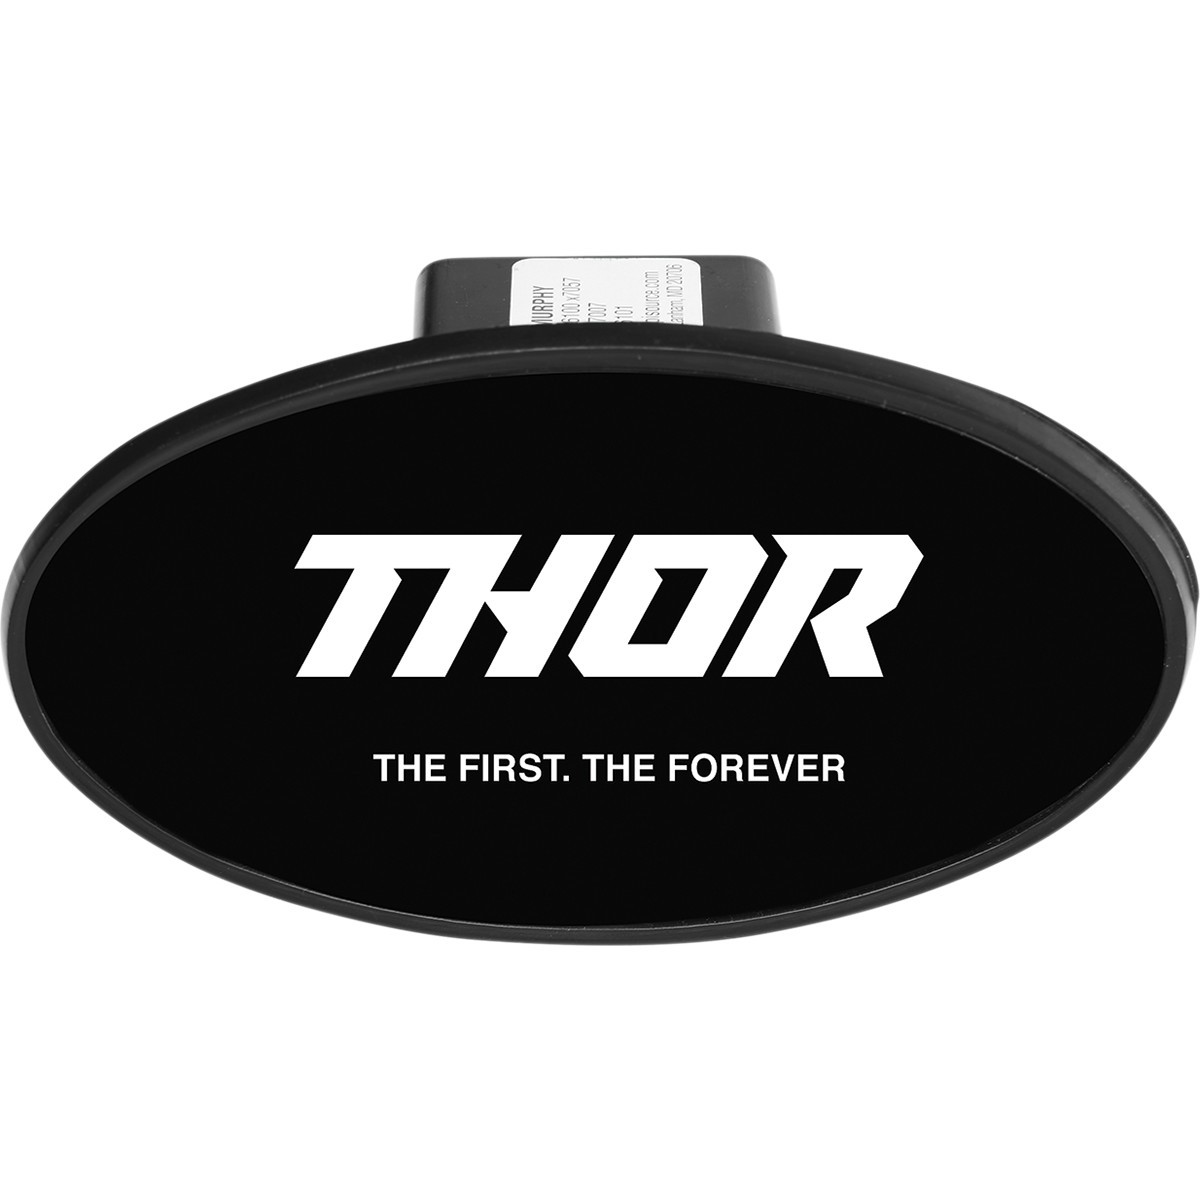 Cache Boule THOR HITCH COVER